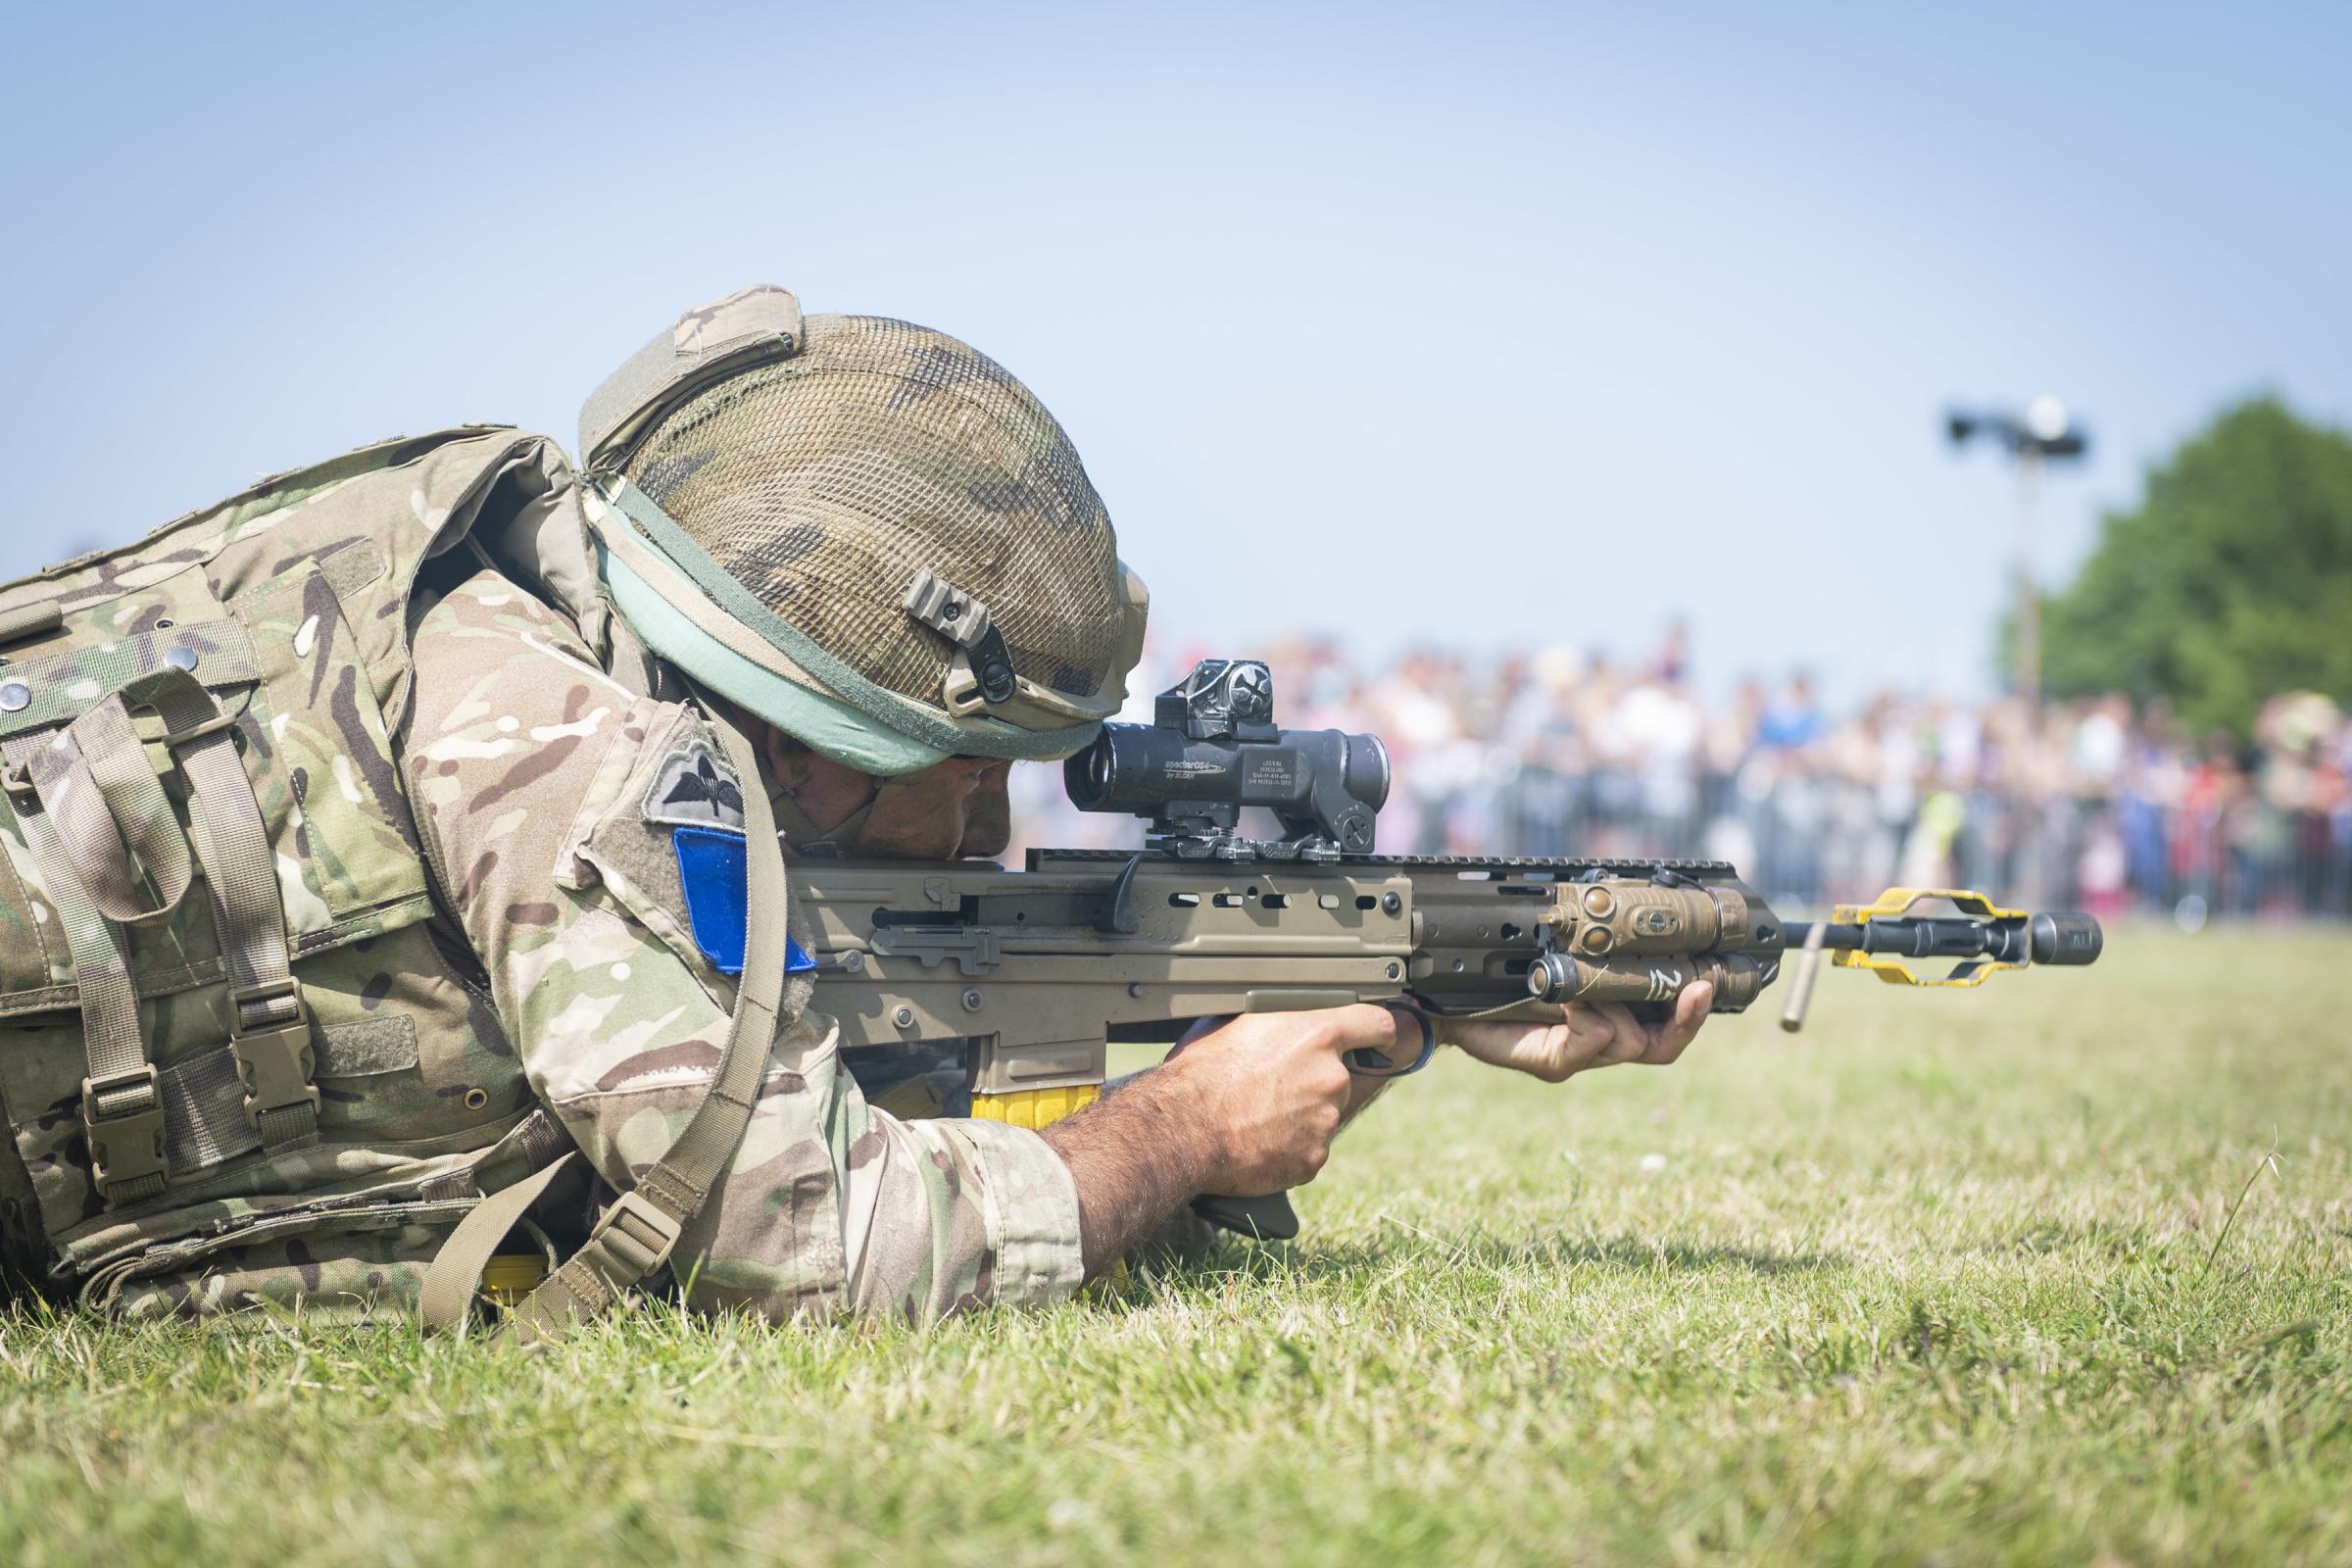 Taking aim - a soldier taking part in combat demonstration at the last event